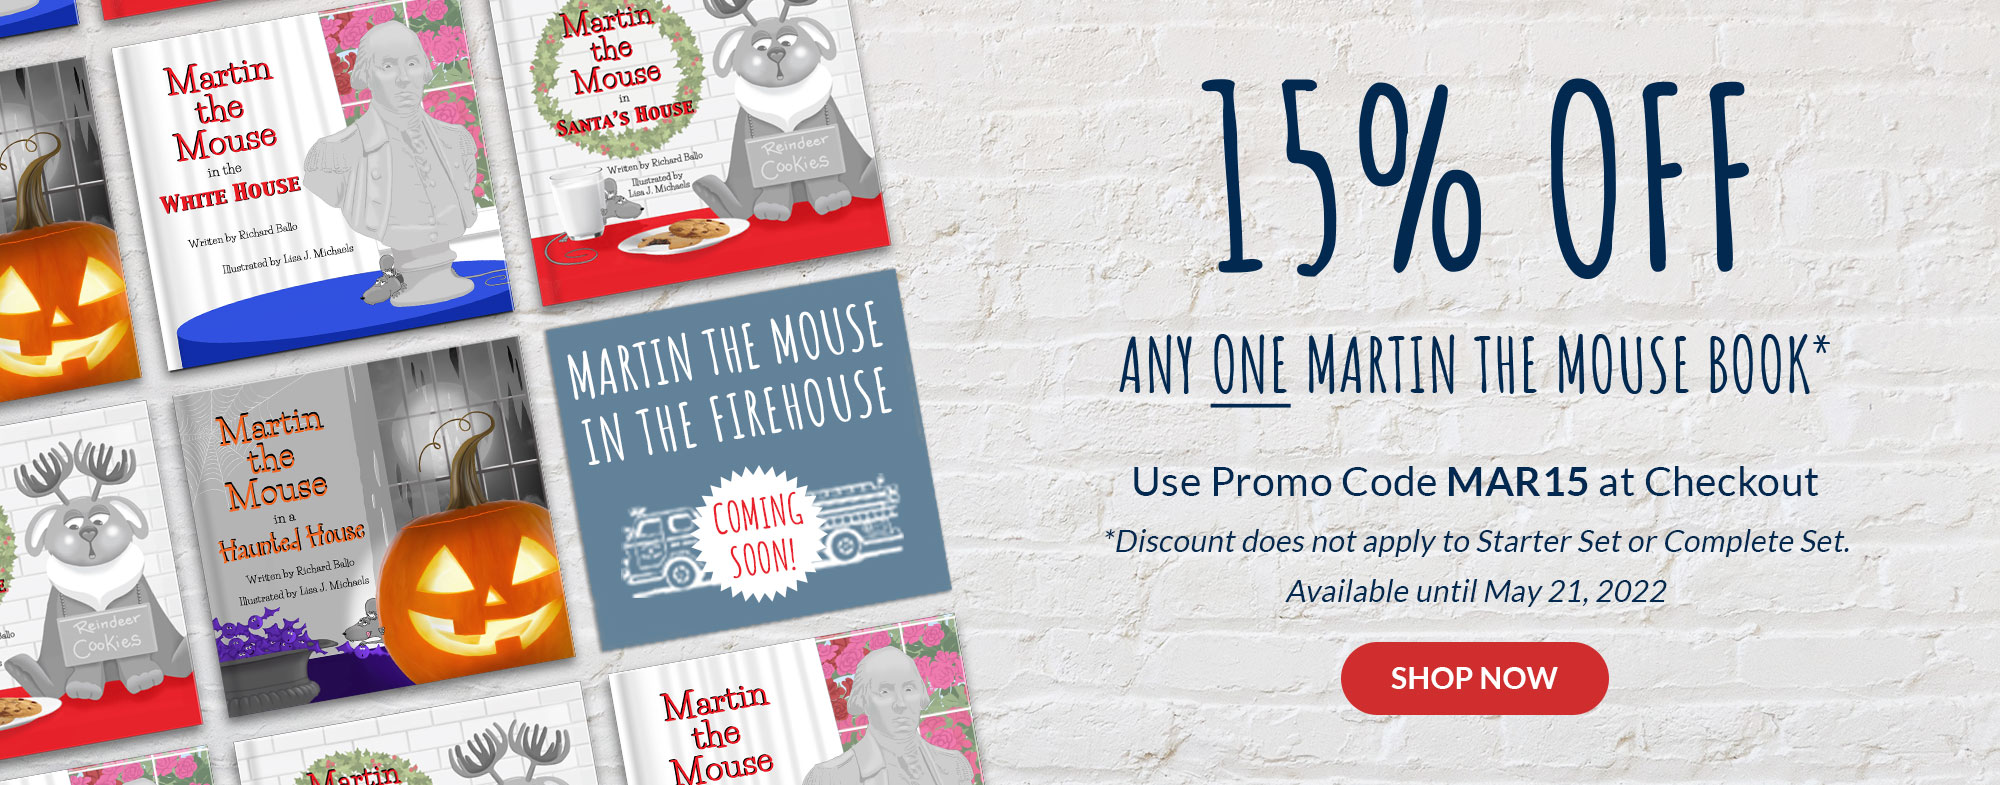 Tolman Main Press Children's Open House Pre Event Promotion 15% off on Martin the Mouse Book - Shop Now